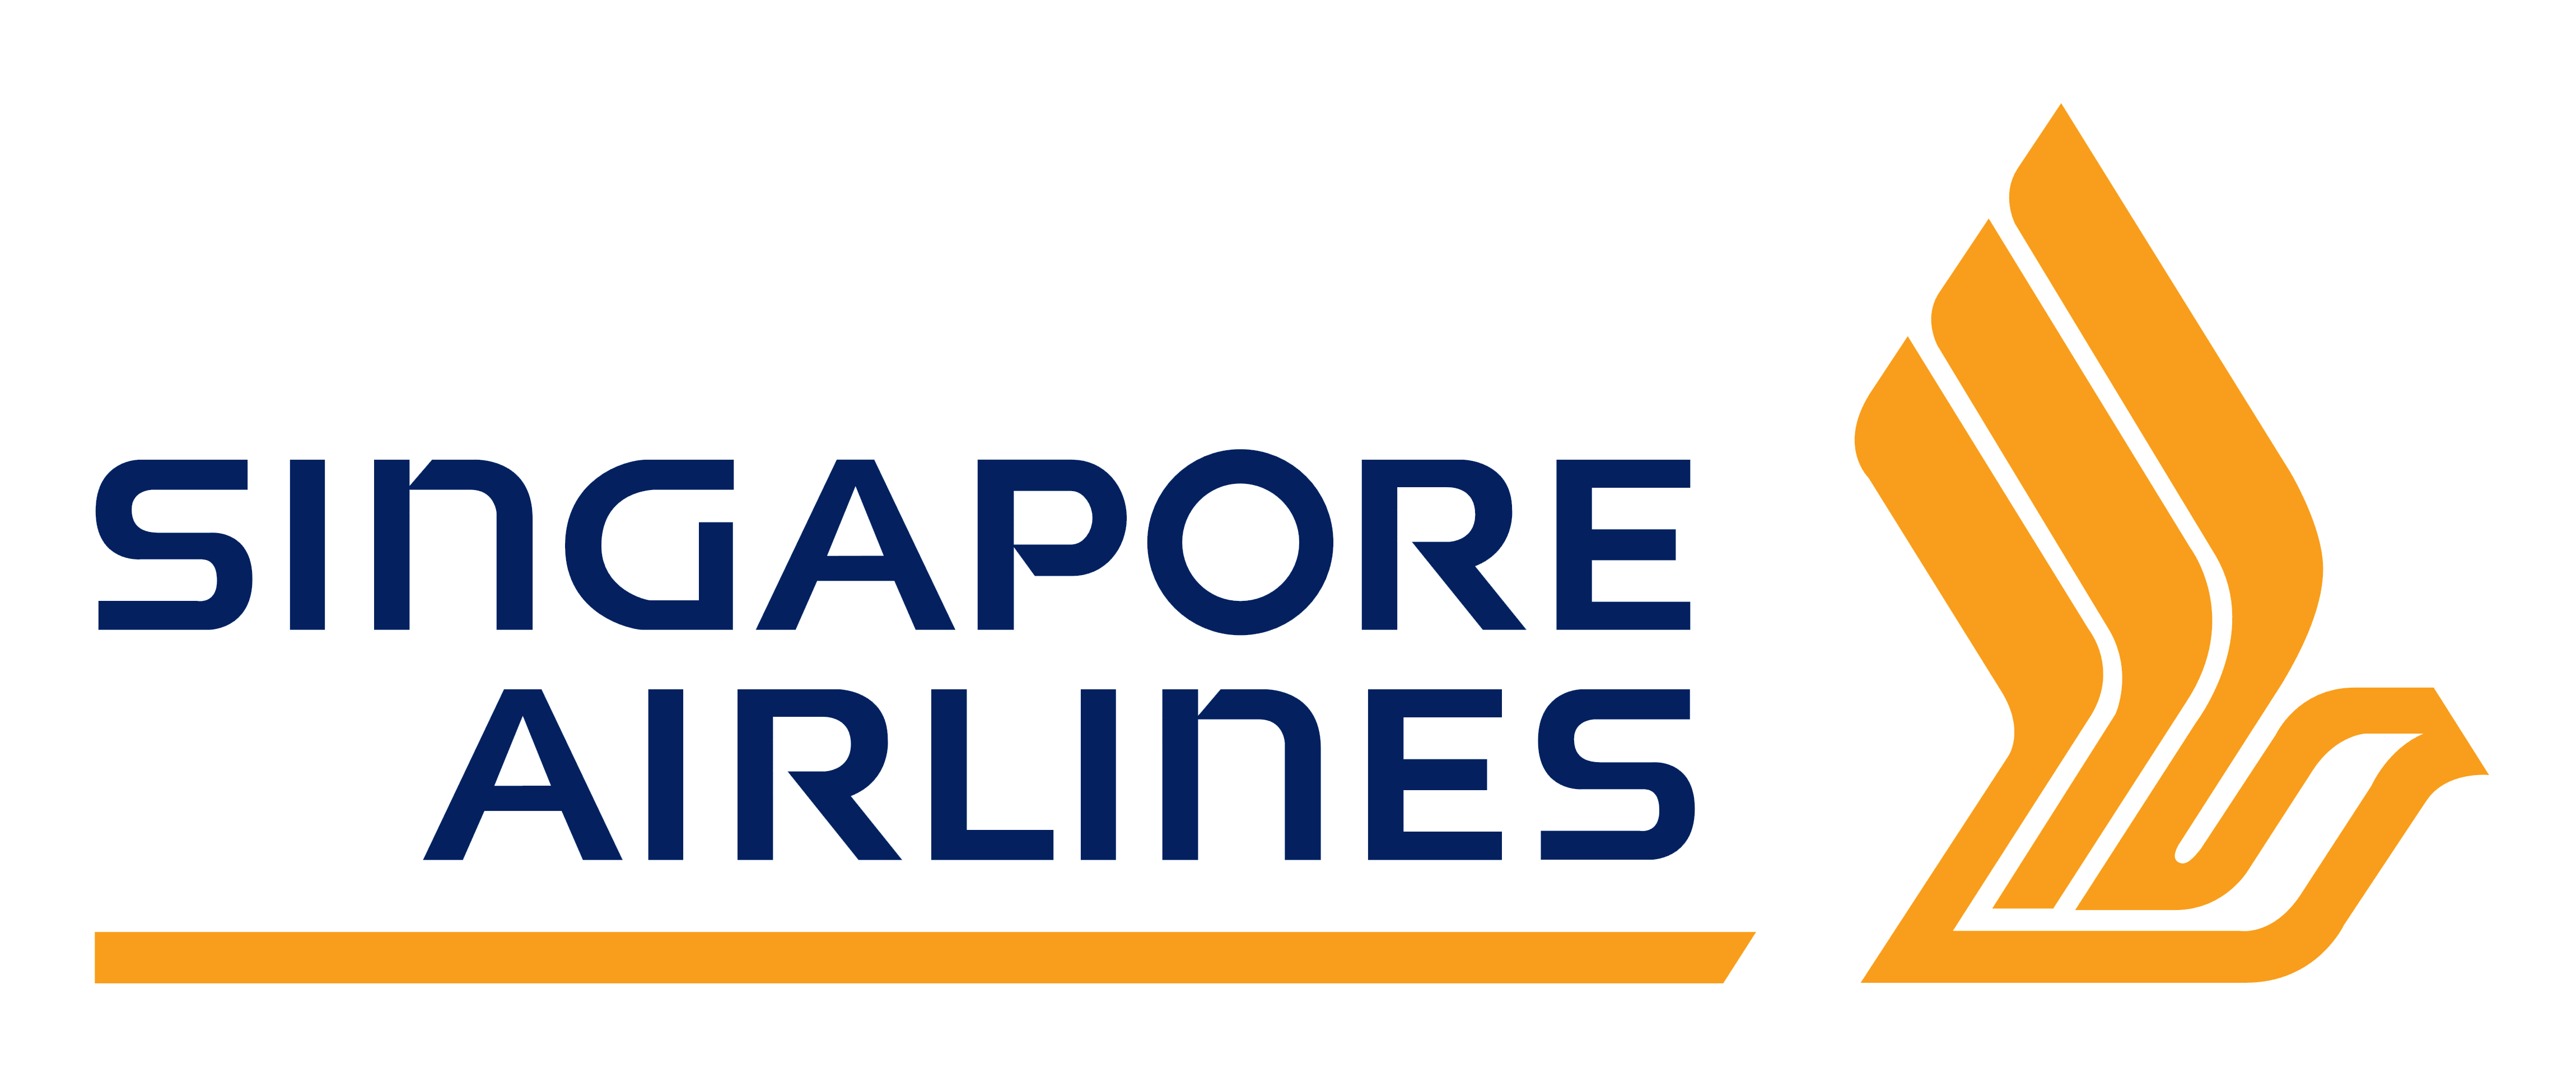 Flight Singapore Greyhound Lines Airlines Airline Clipart